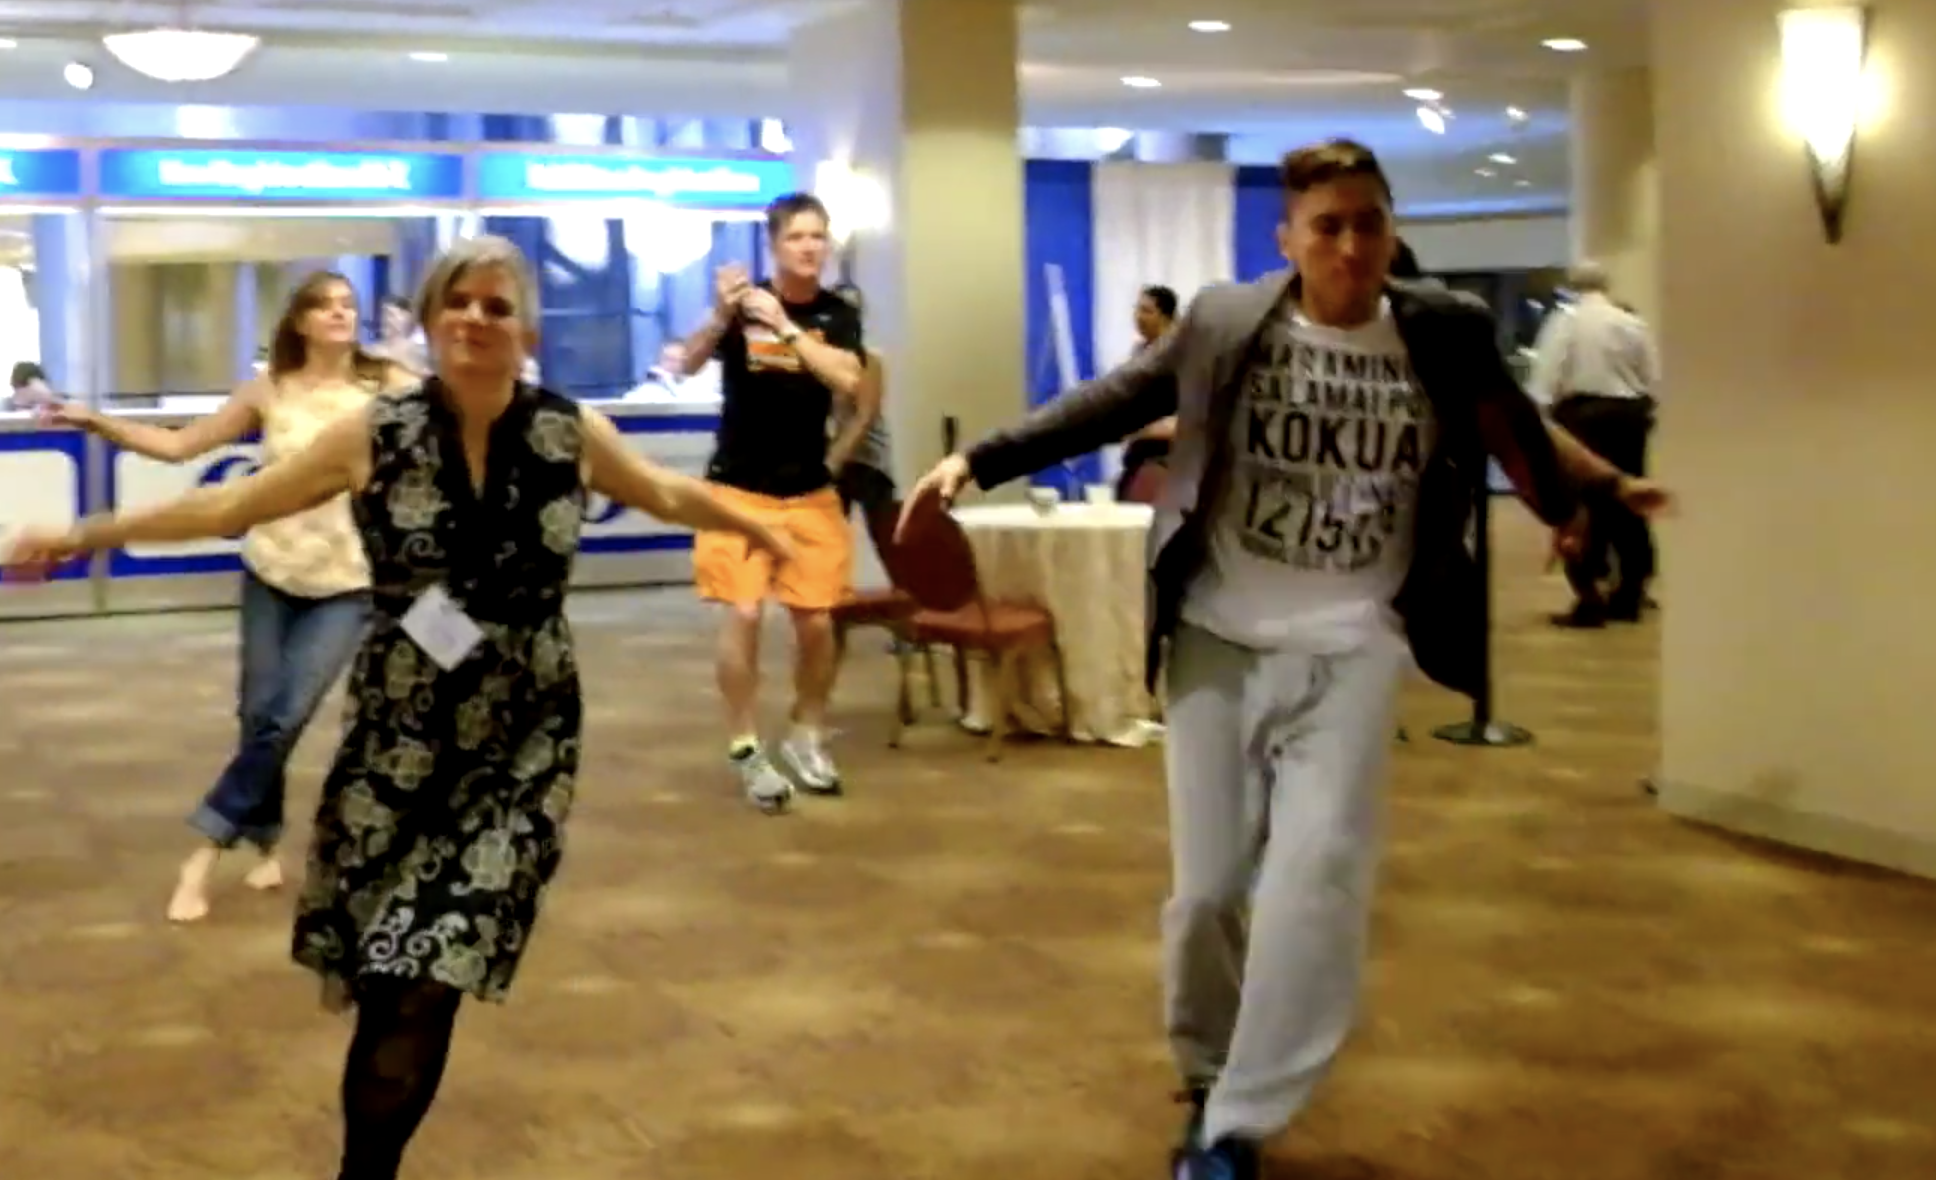 One white woman and Brown man dance in a lobby